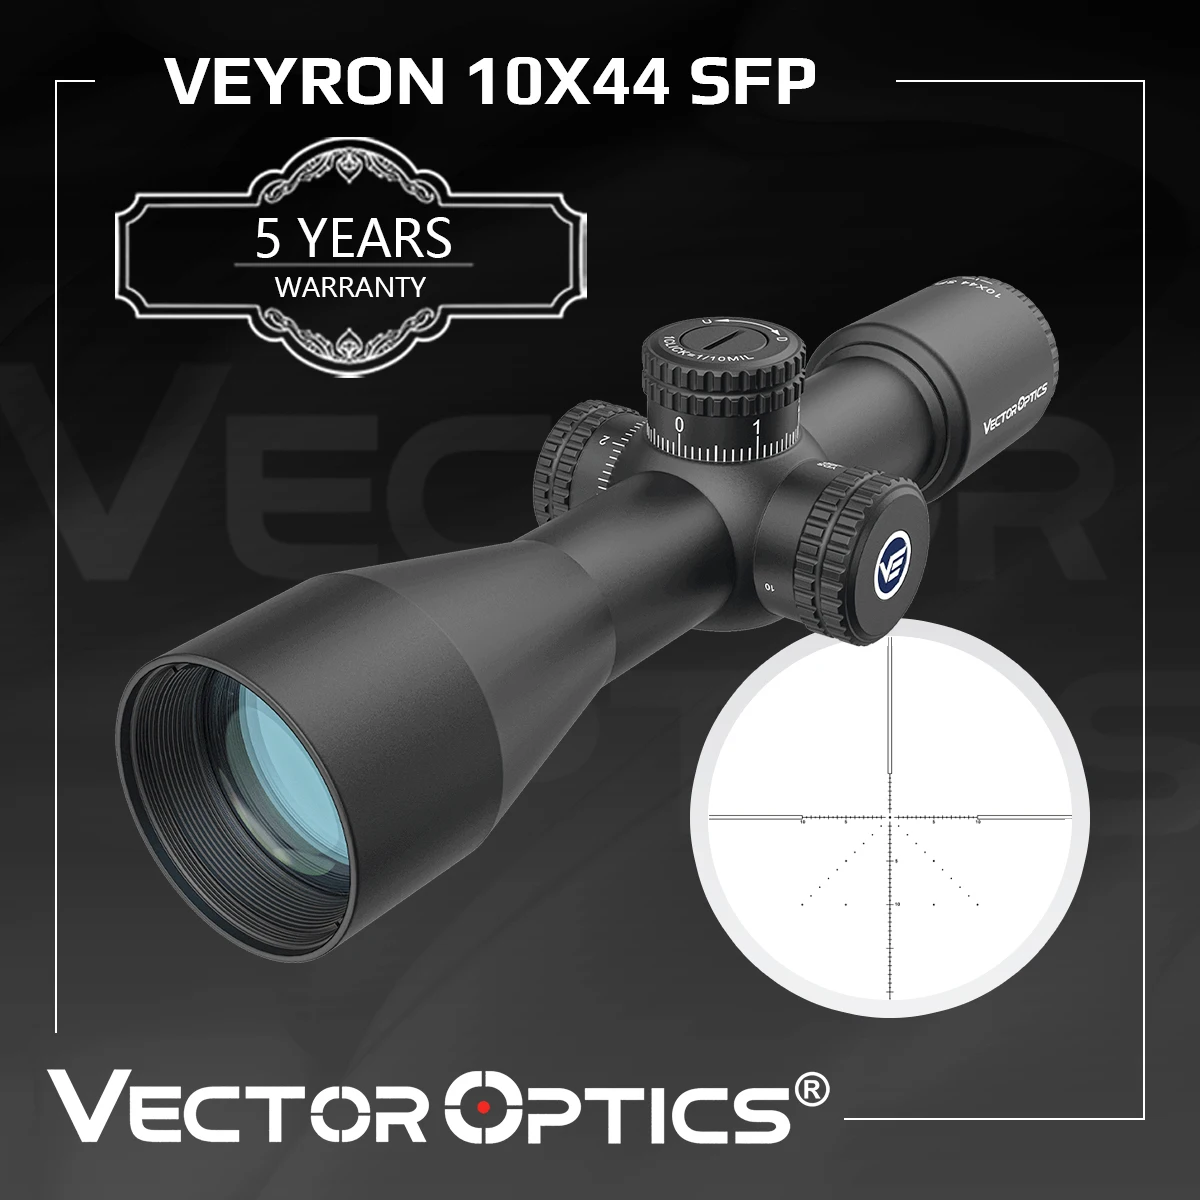 

Vector Optics Veyron 10x44 Riflescope Hunting Rifle Scope Compact Tactical Scopes Turret Lock 1/10 MIL Fit Real Firearms &Airgun